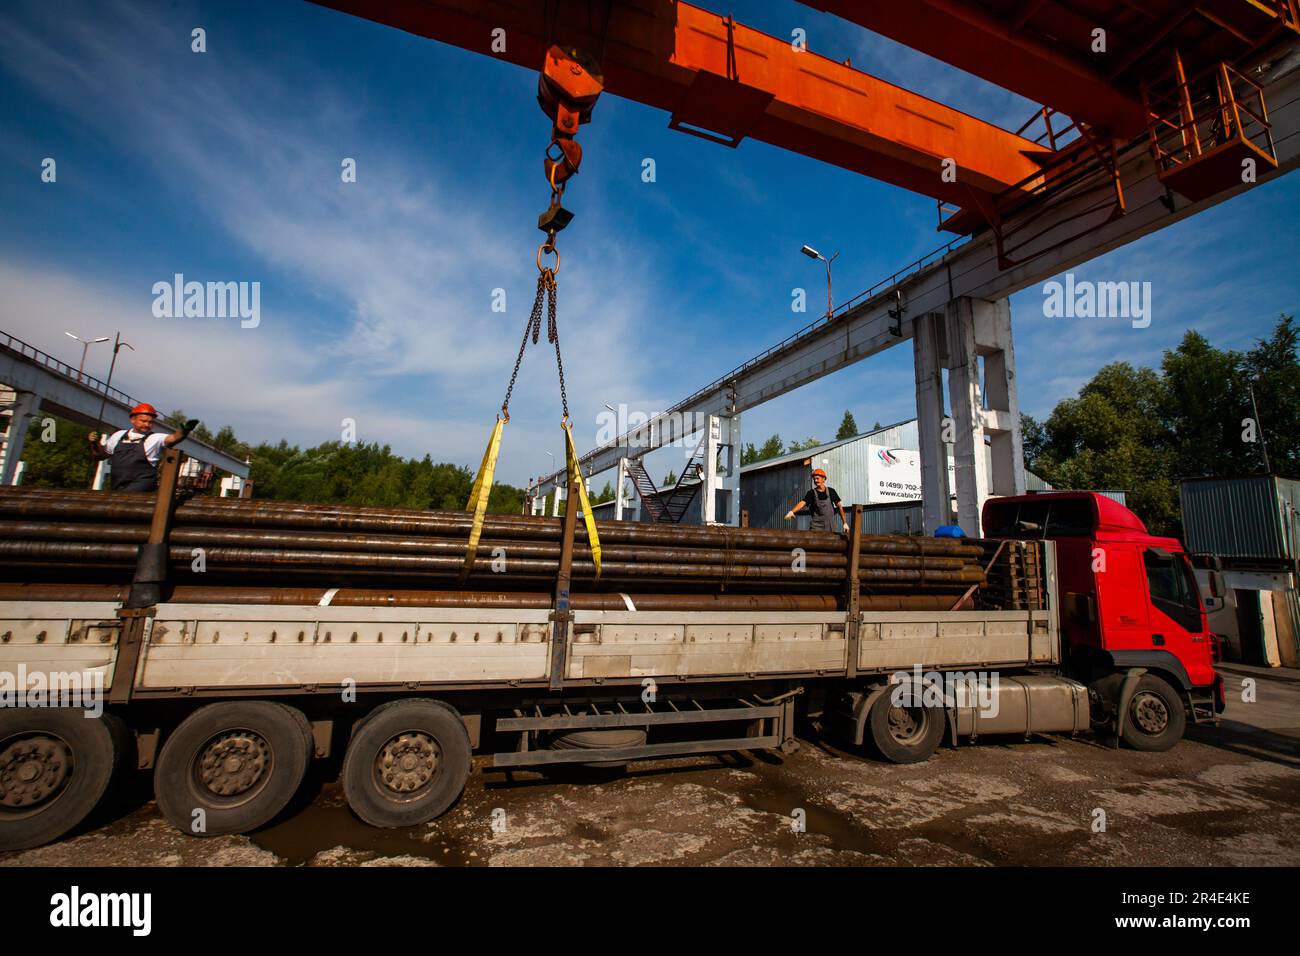 Podolsk, Moscow province - August 02, 2021: Pipes warehouse. Workers loads pipes on truck with overhead crane Stock Photo